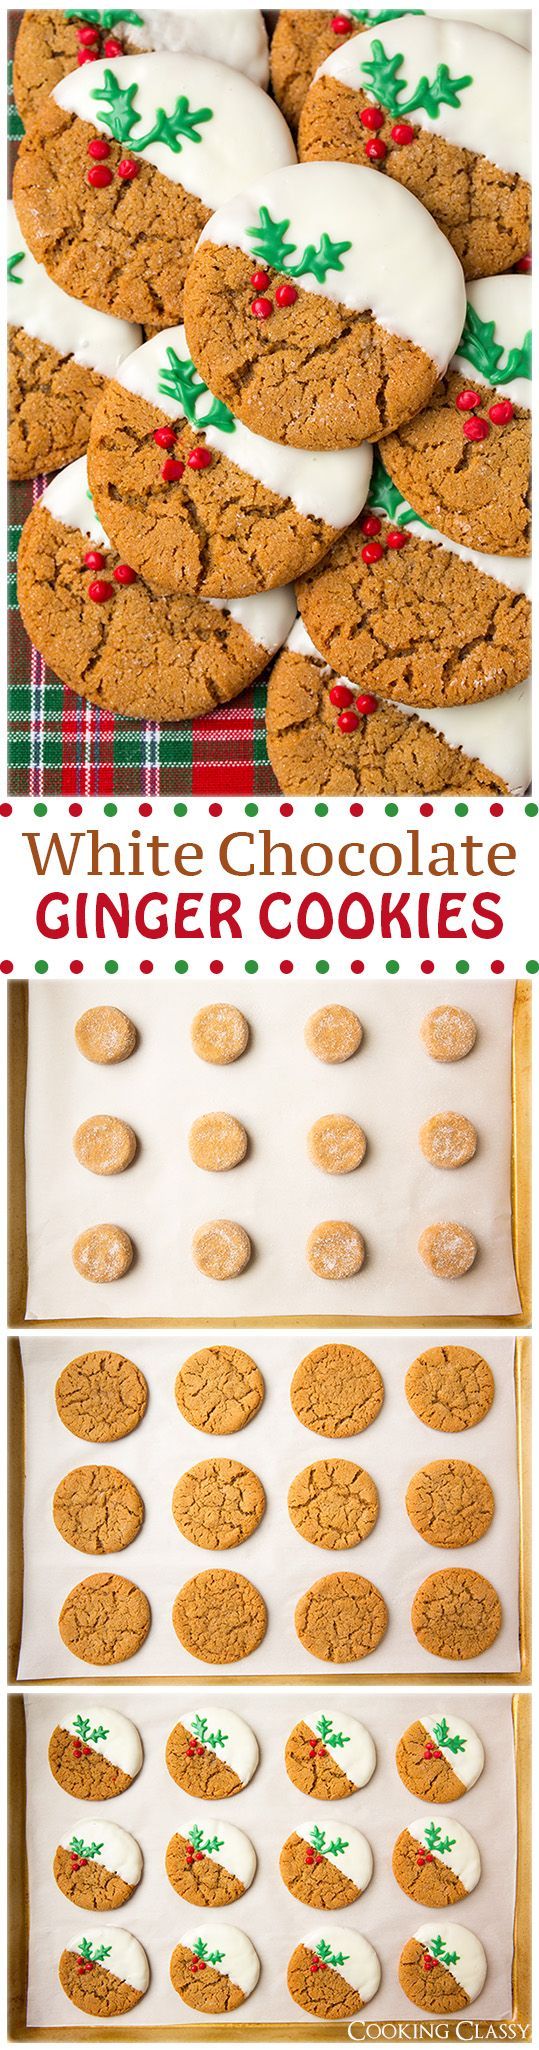 White Chocolate Dipped Ginger Cookies (soft and chewy) – these cookies are SO GOOD